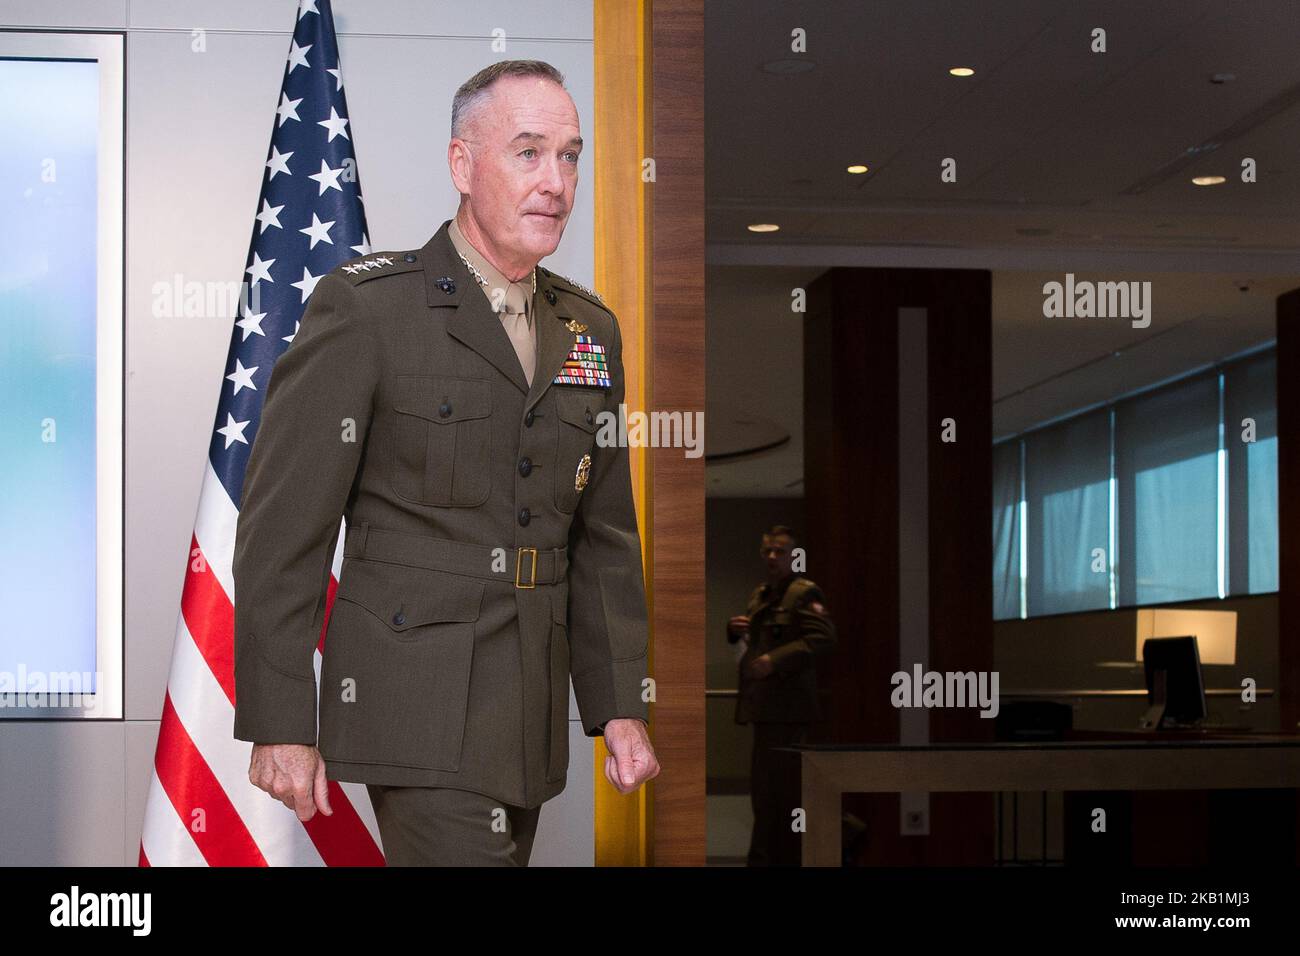 Chairman of the Joint Chiefs of Staff (highest-ranking military officer in the US Army) Joseph Dunford during the NATO Military Committee Conference at Double Tree by Hilton hotel in Warsaw, Poland on 29 September 2018 (Photo by Mateusz Wlodarczyk/NurPhoto) Stock Photo